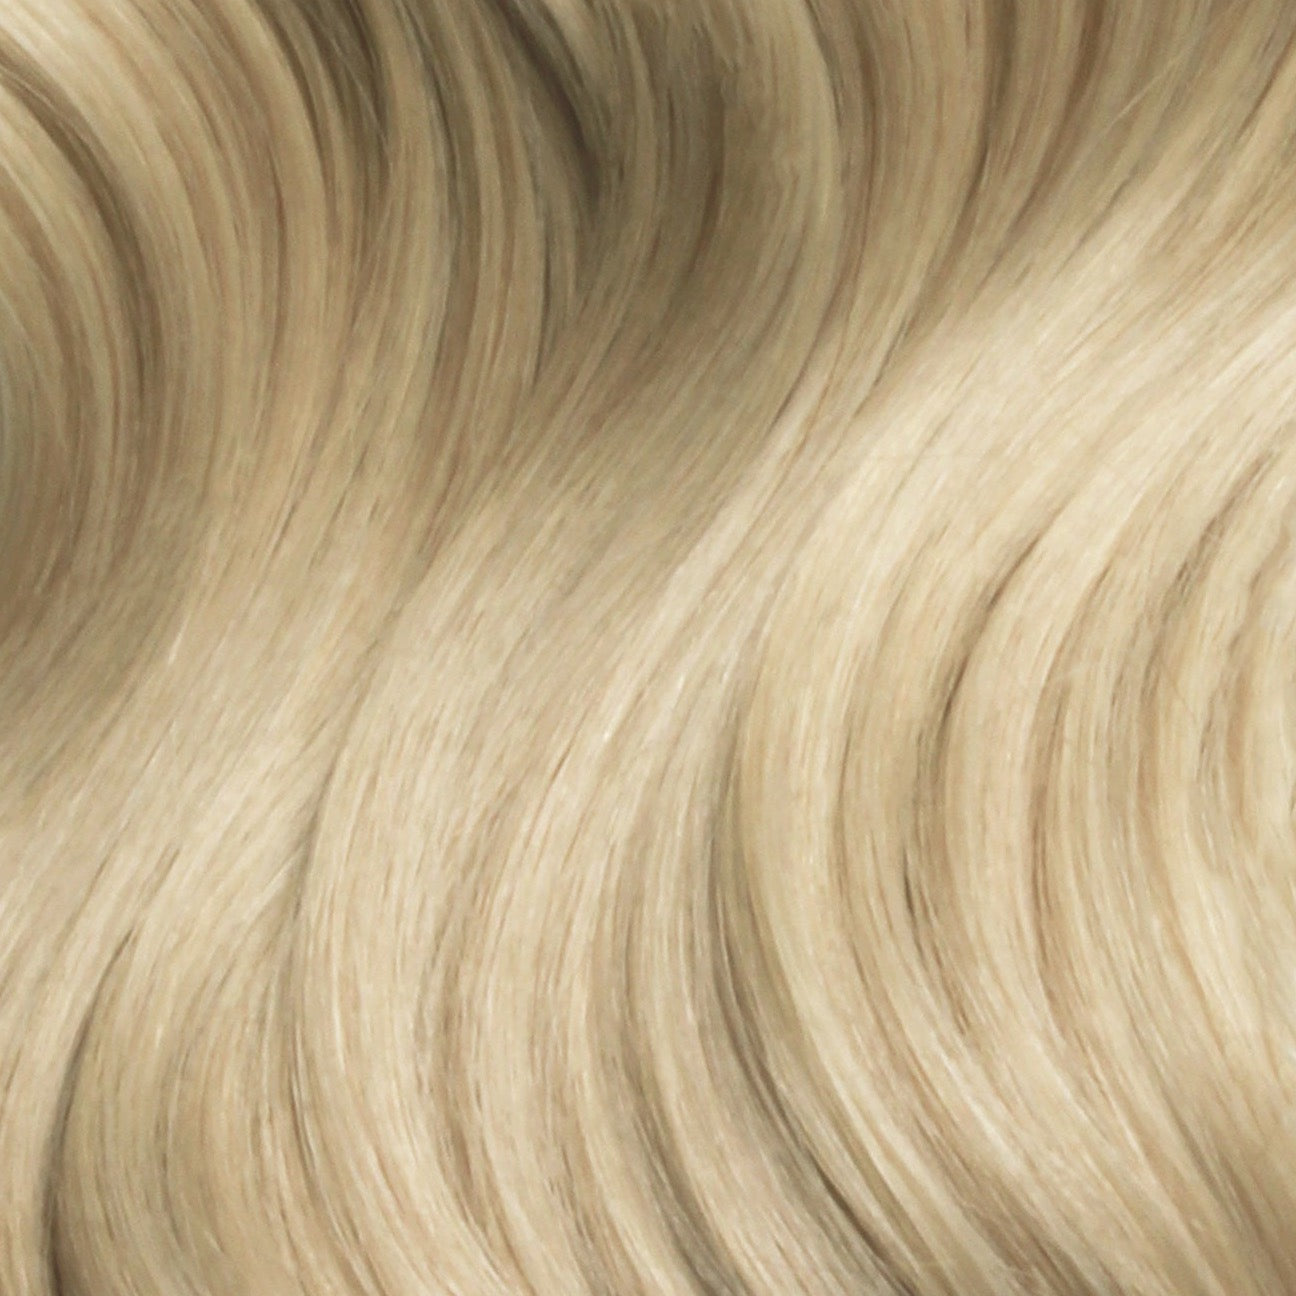 Nano Bonds 20 Inches - SWAY Hair Extensions Silver-Ash-Blonde-60A-Silver Ultra-fine, invisible bonds for a flawless, natural look. 100% Remy Human hair, lightweight and versatile. Reusable and perfect for individual or salon use.